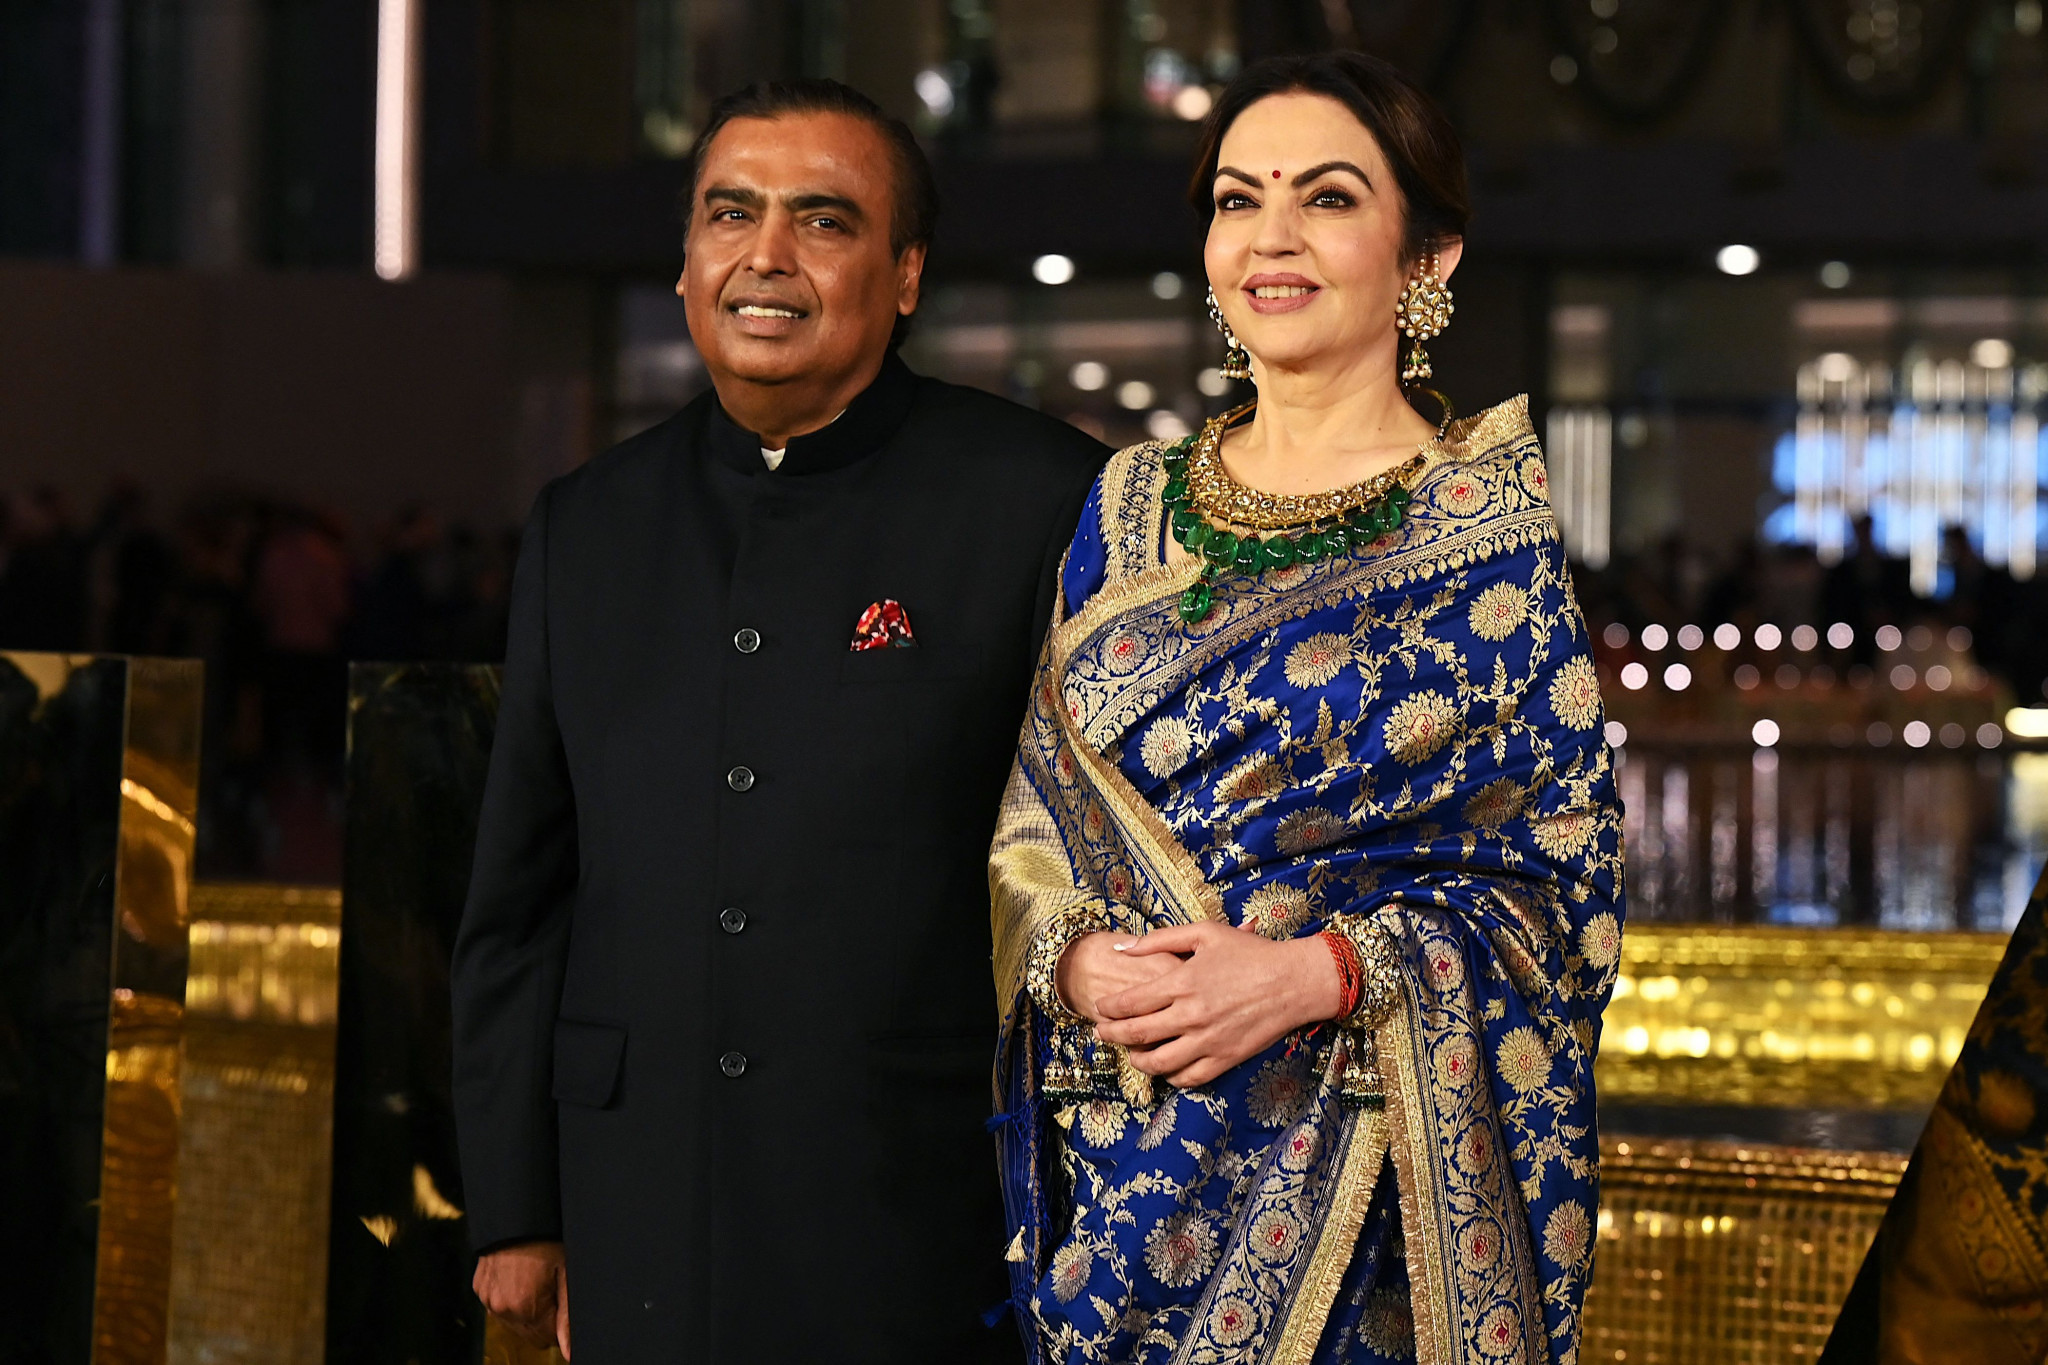 
Chairman of Reliance Industries Mukesh Ambani, left, and wife Nita Ambani, who is an IOC member, could push to become TOP sponsor when India hosts the Session in Mumbai next month ©Getty Images